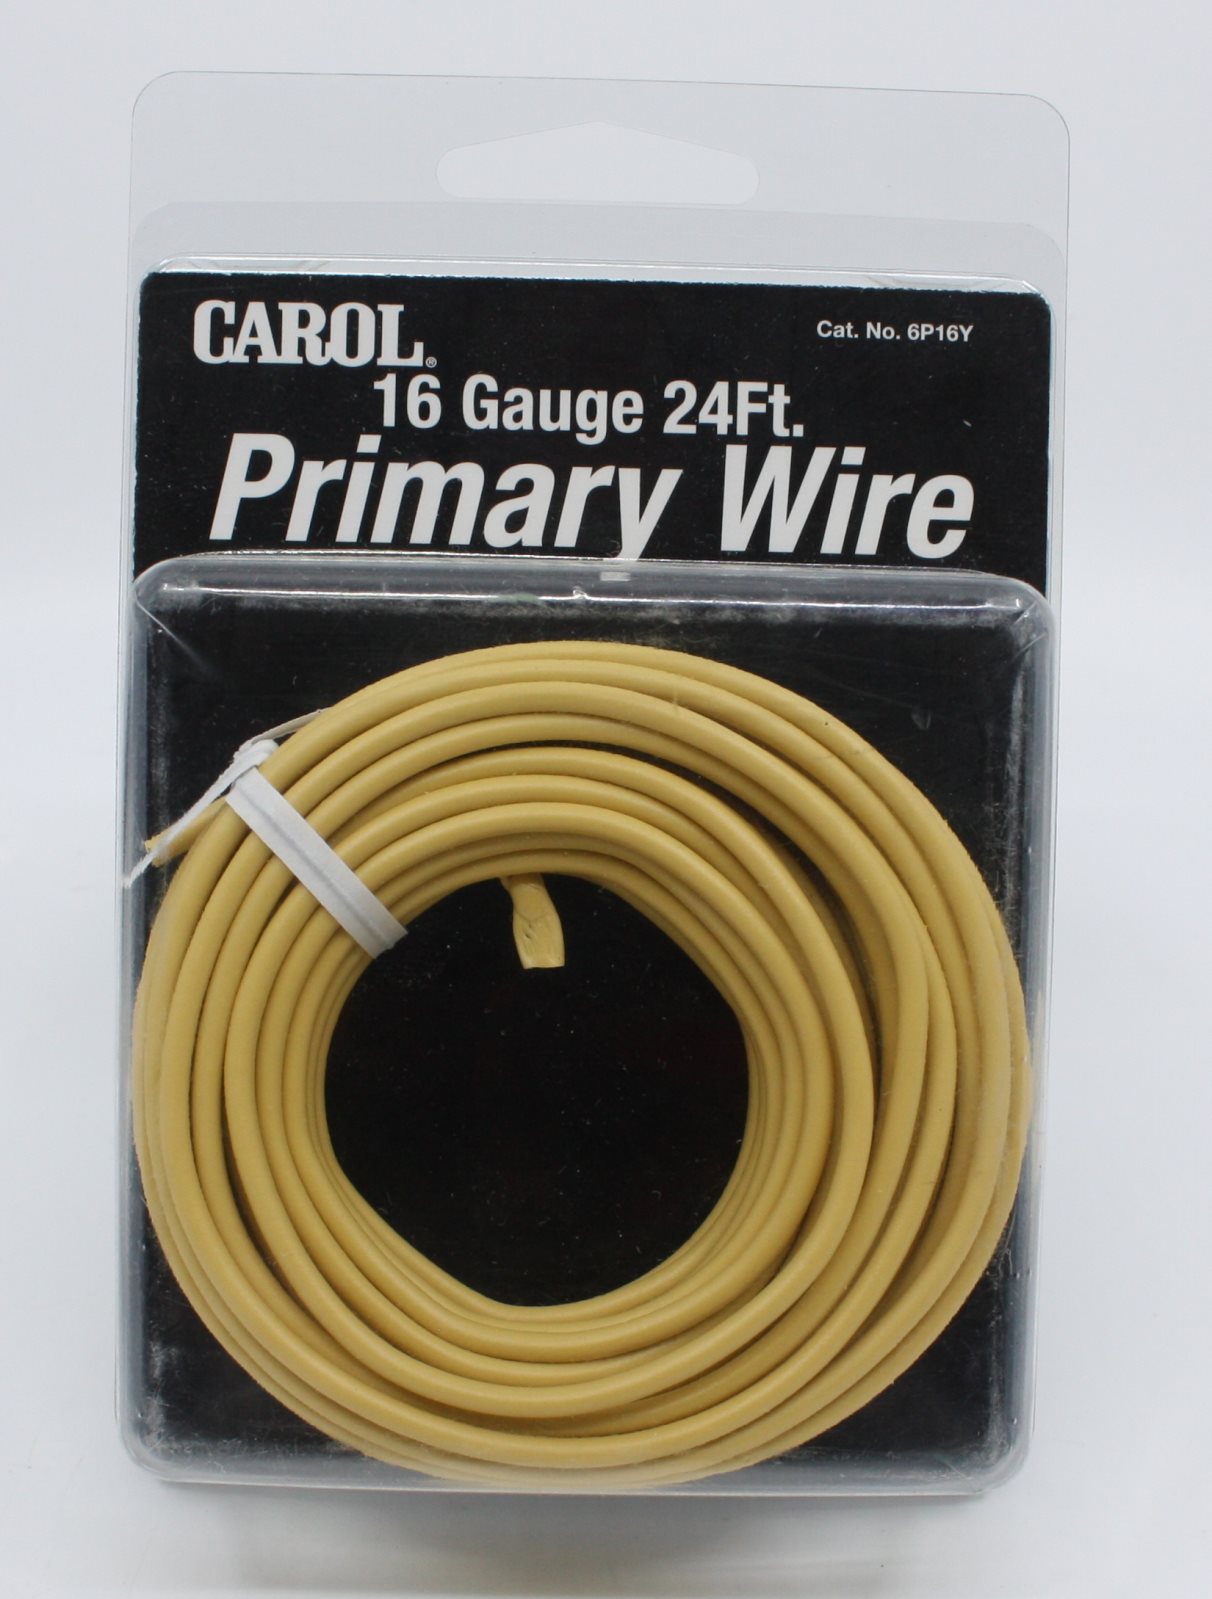 Carol 6P16Y 24' Primary Wire by General Cable